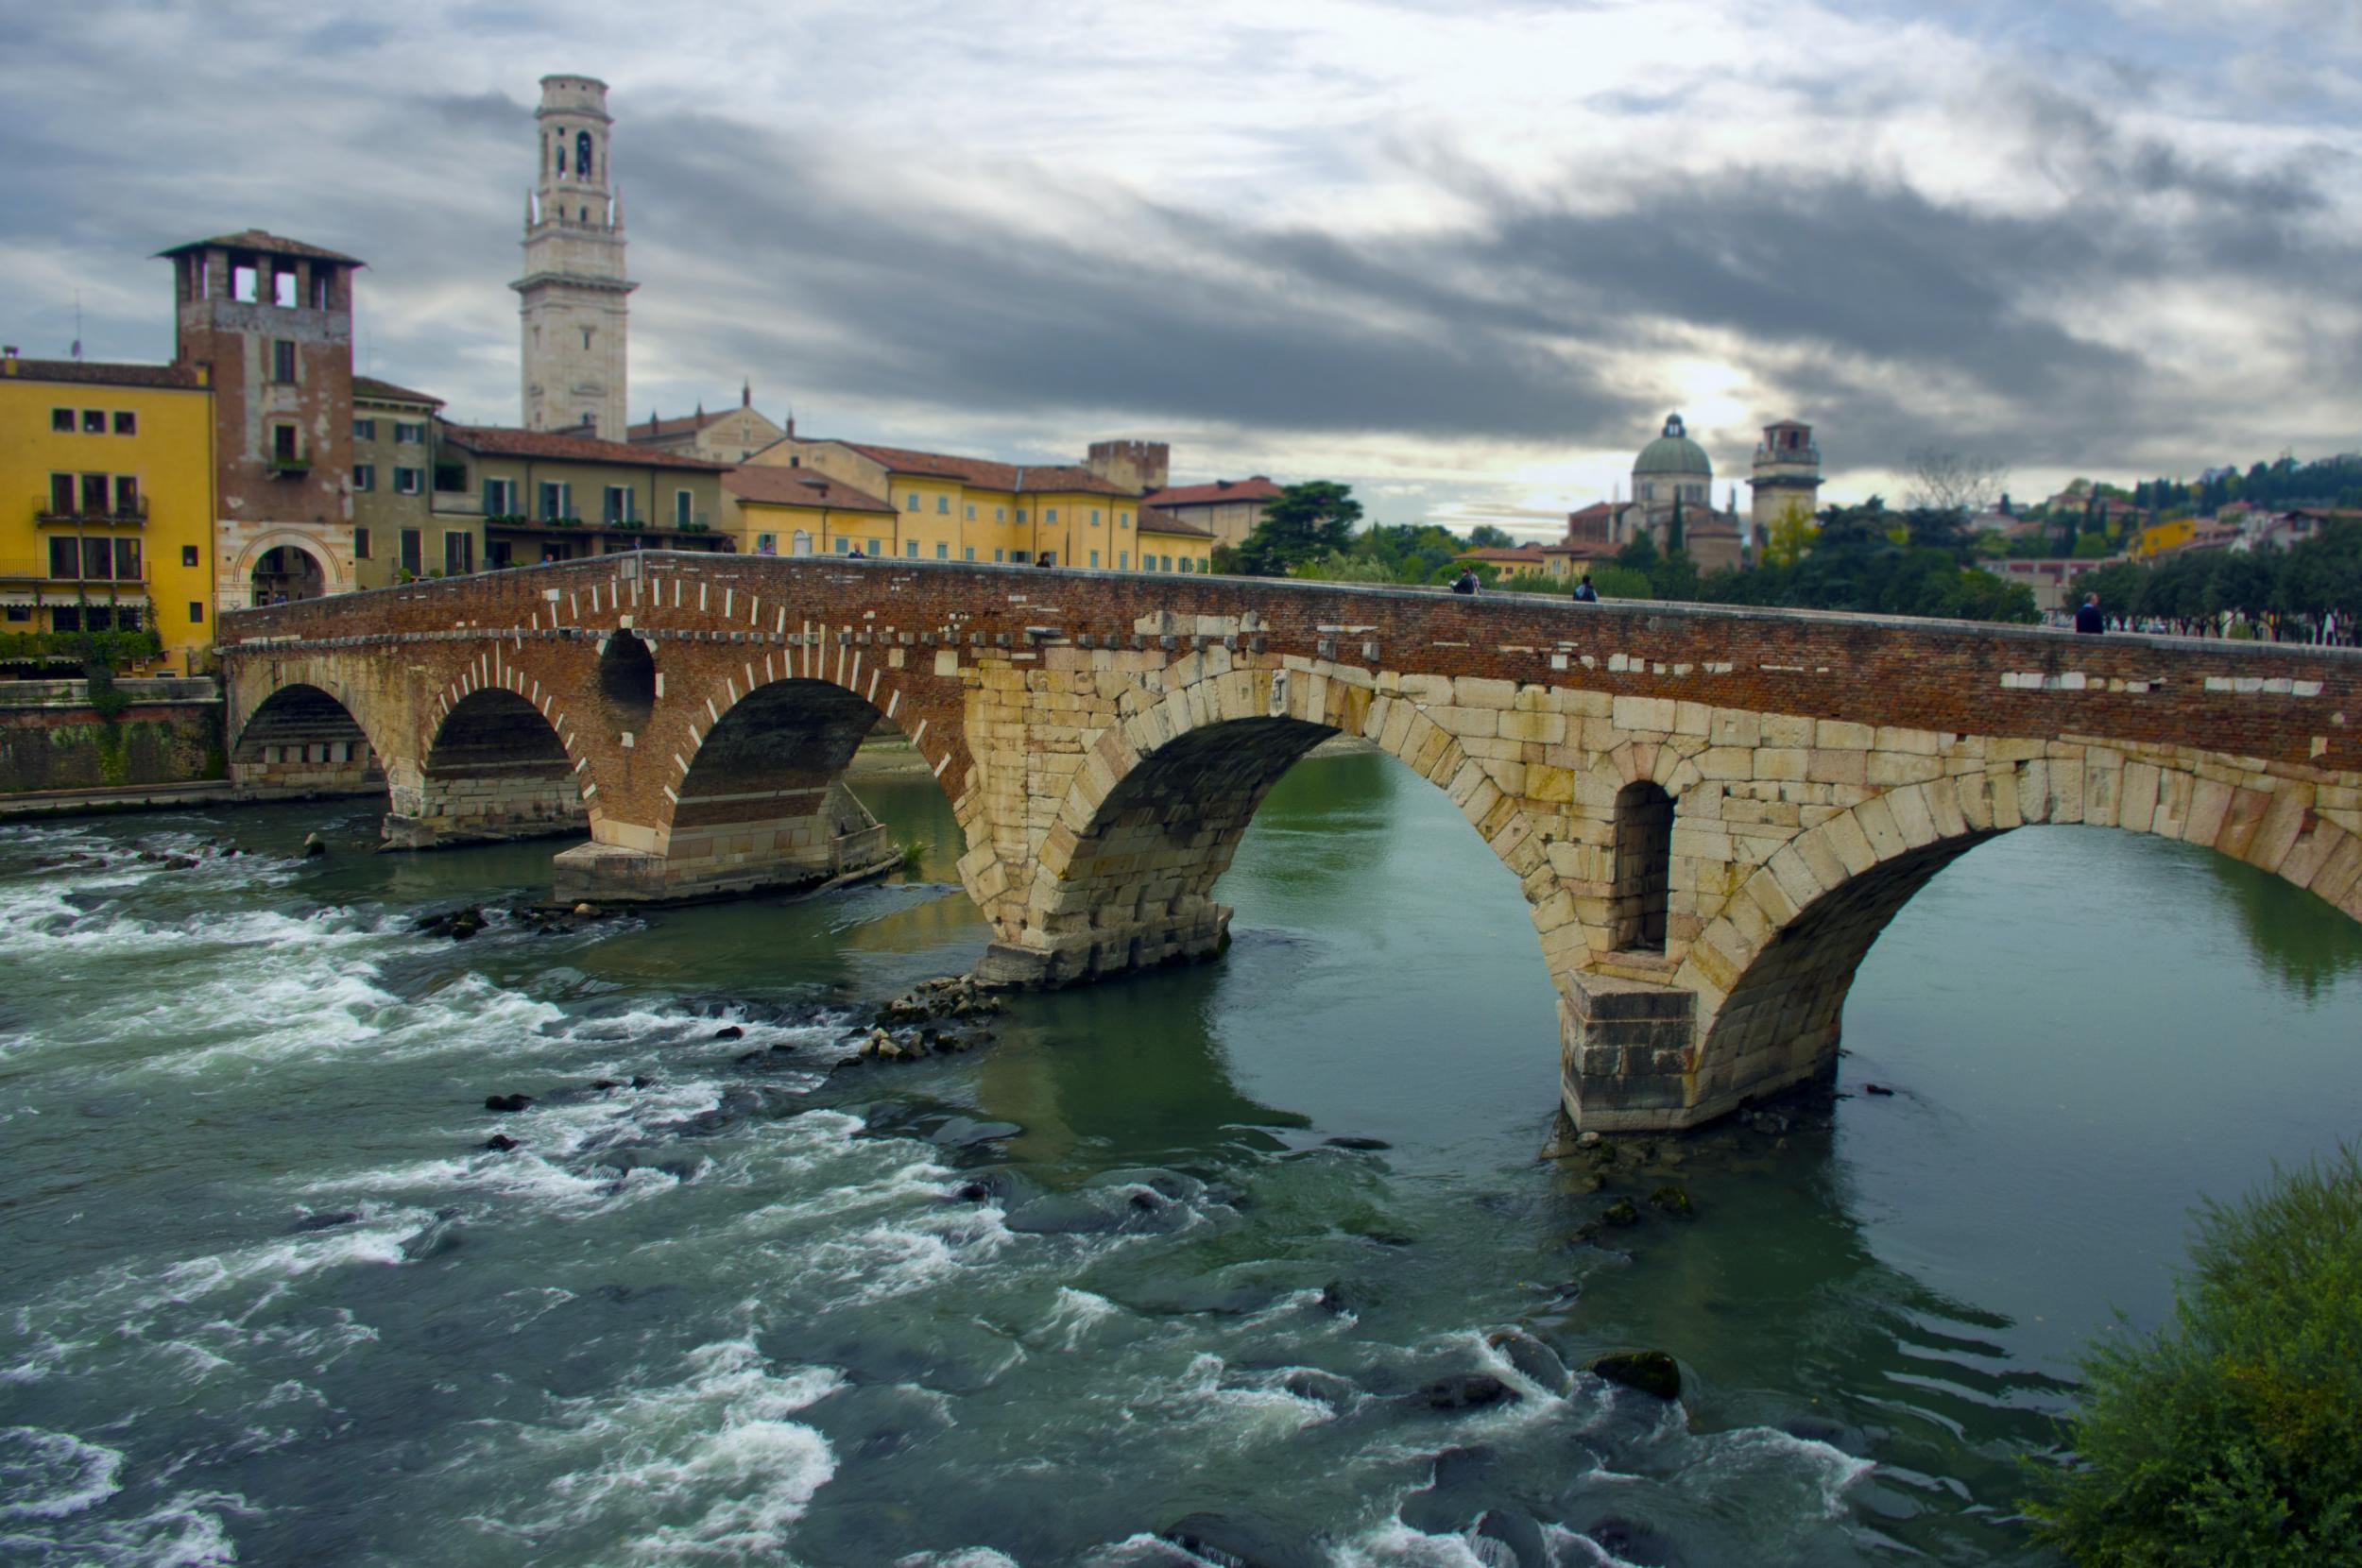 48 hours in Verona: hotels, restaurants and places to visit